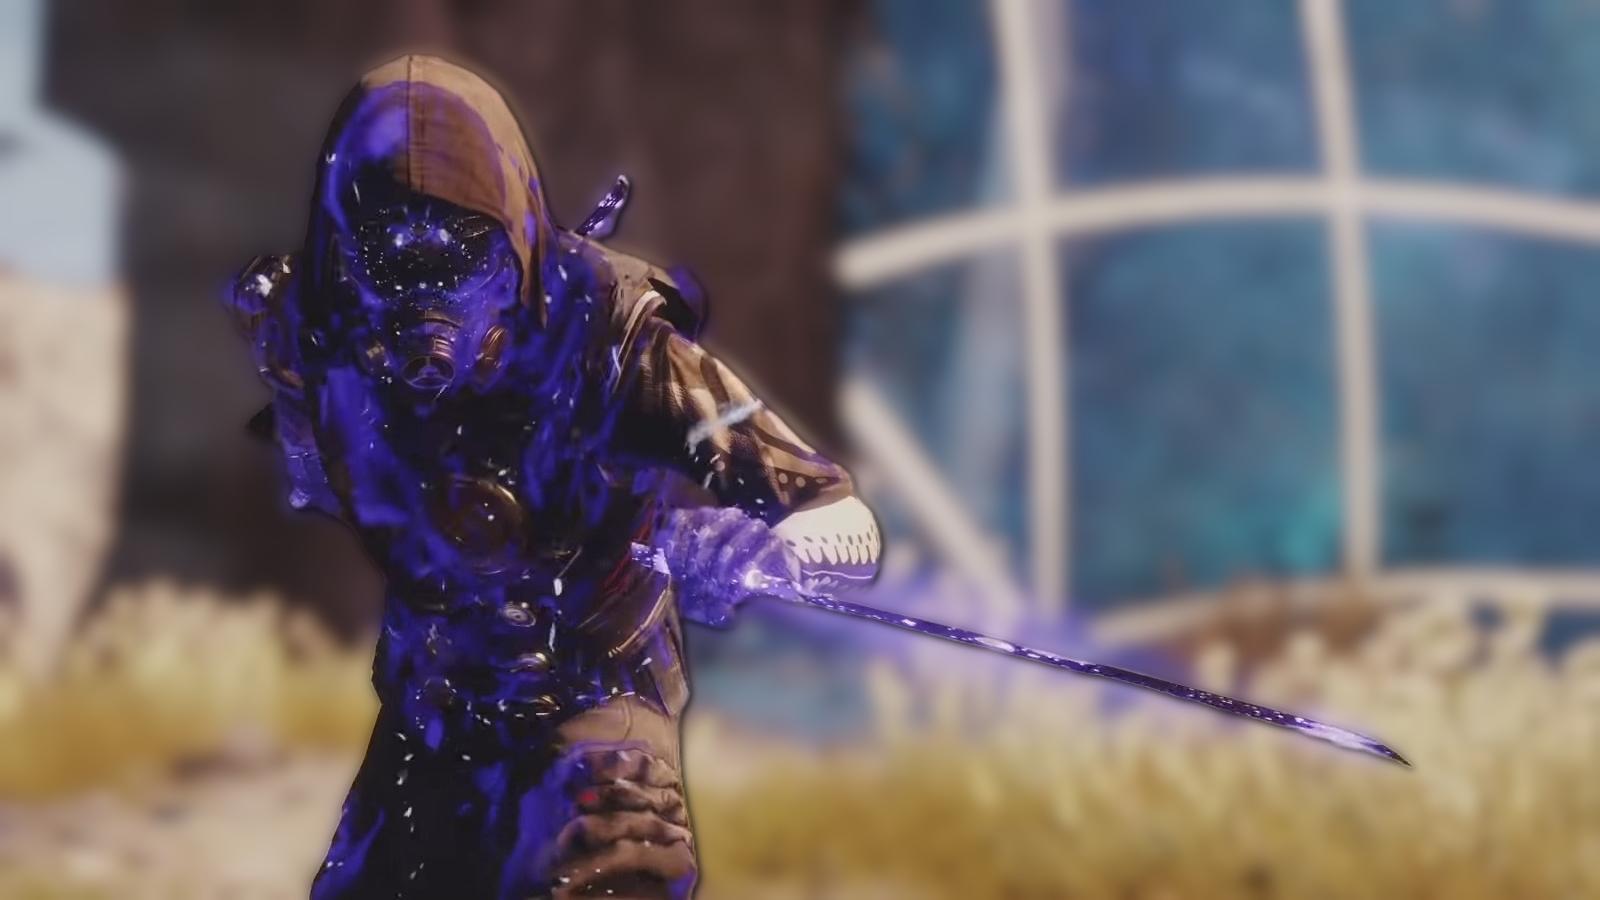 Void Hunter in Destiny 2 Spectral Blade ability.